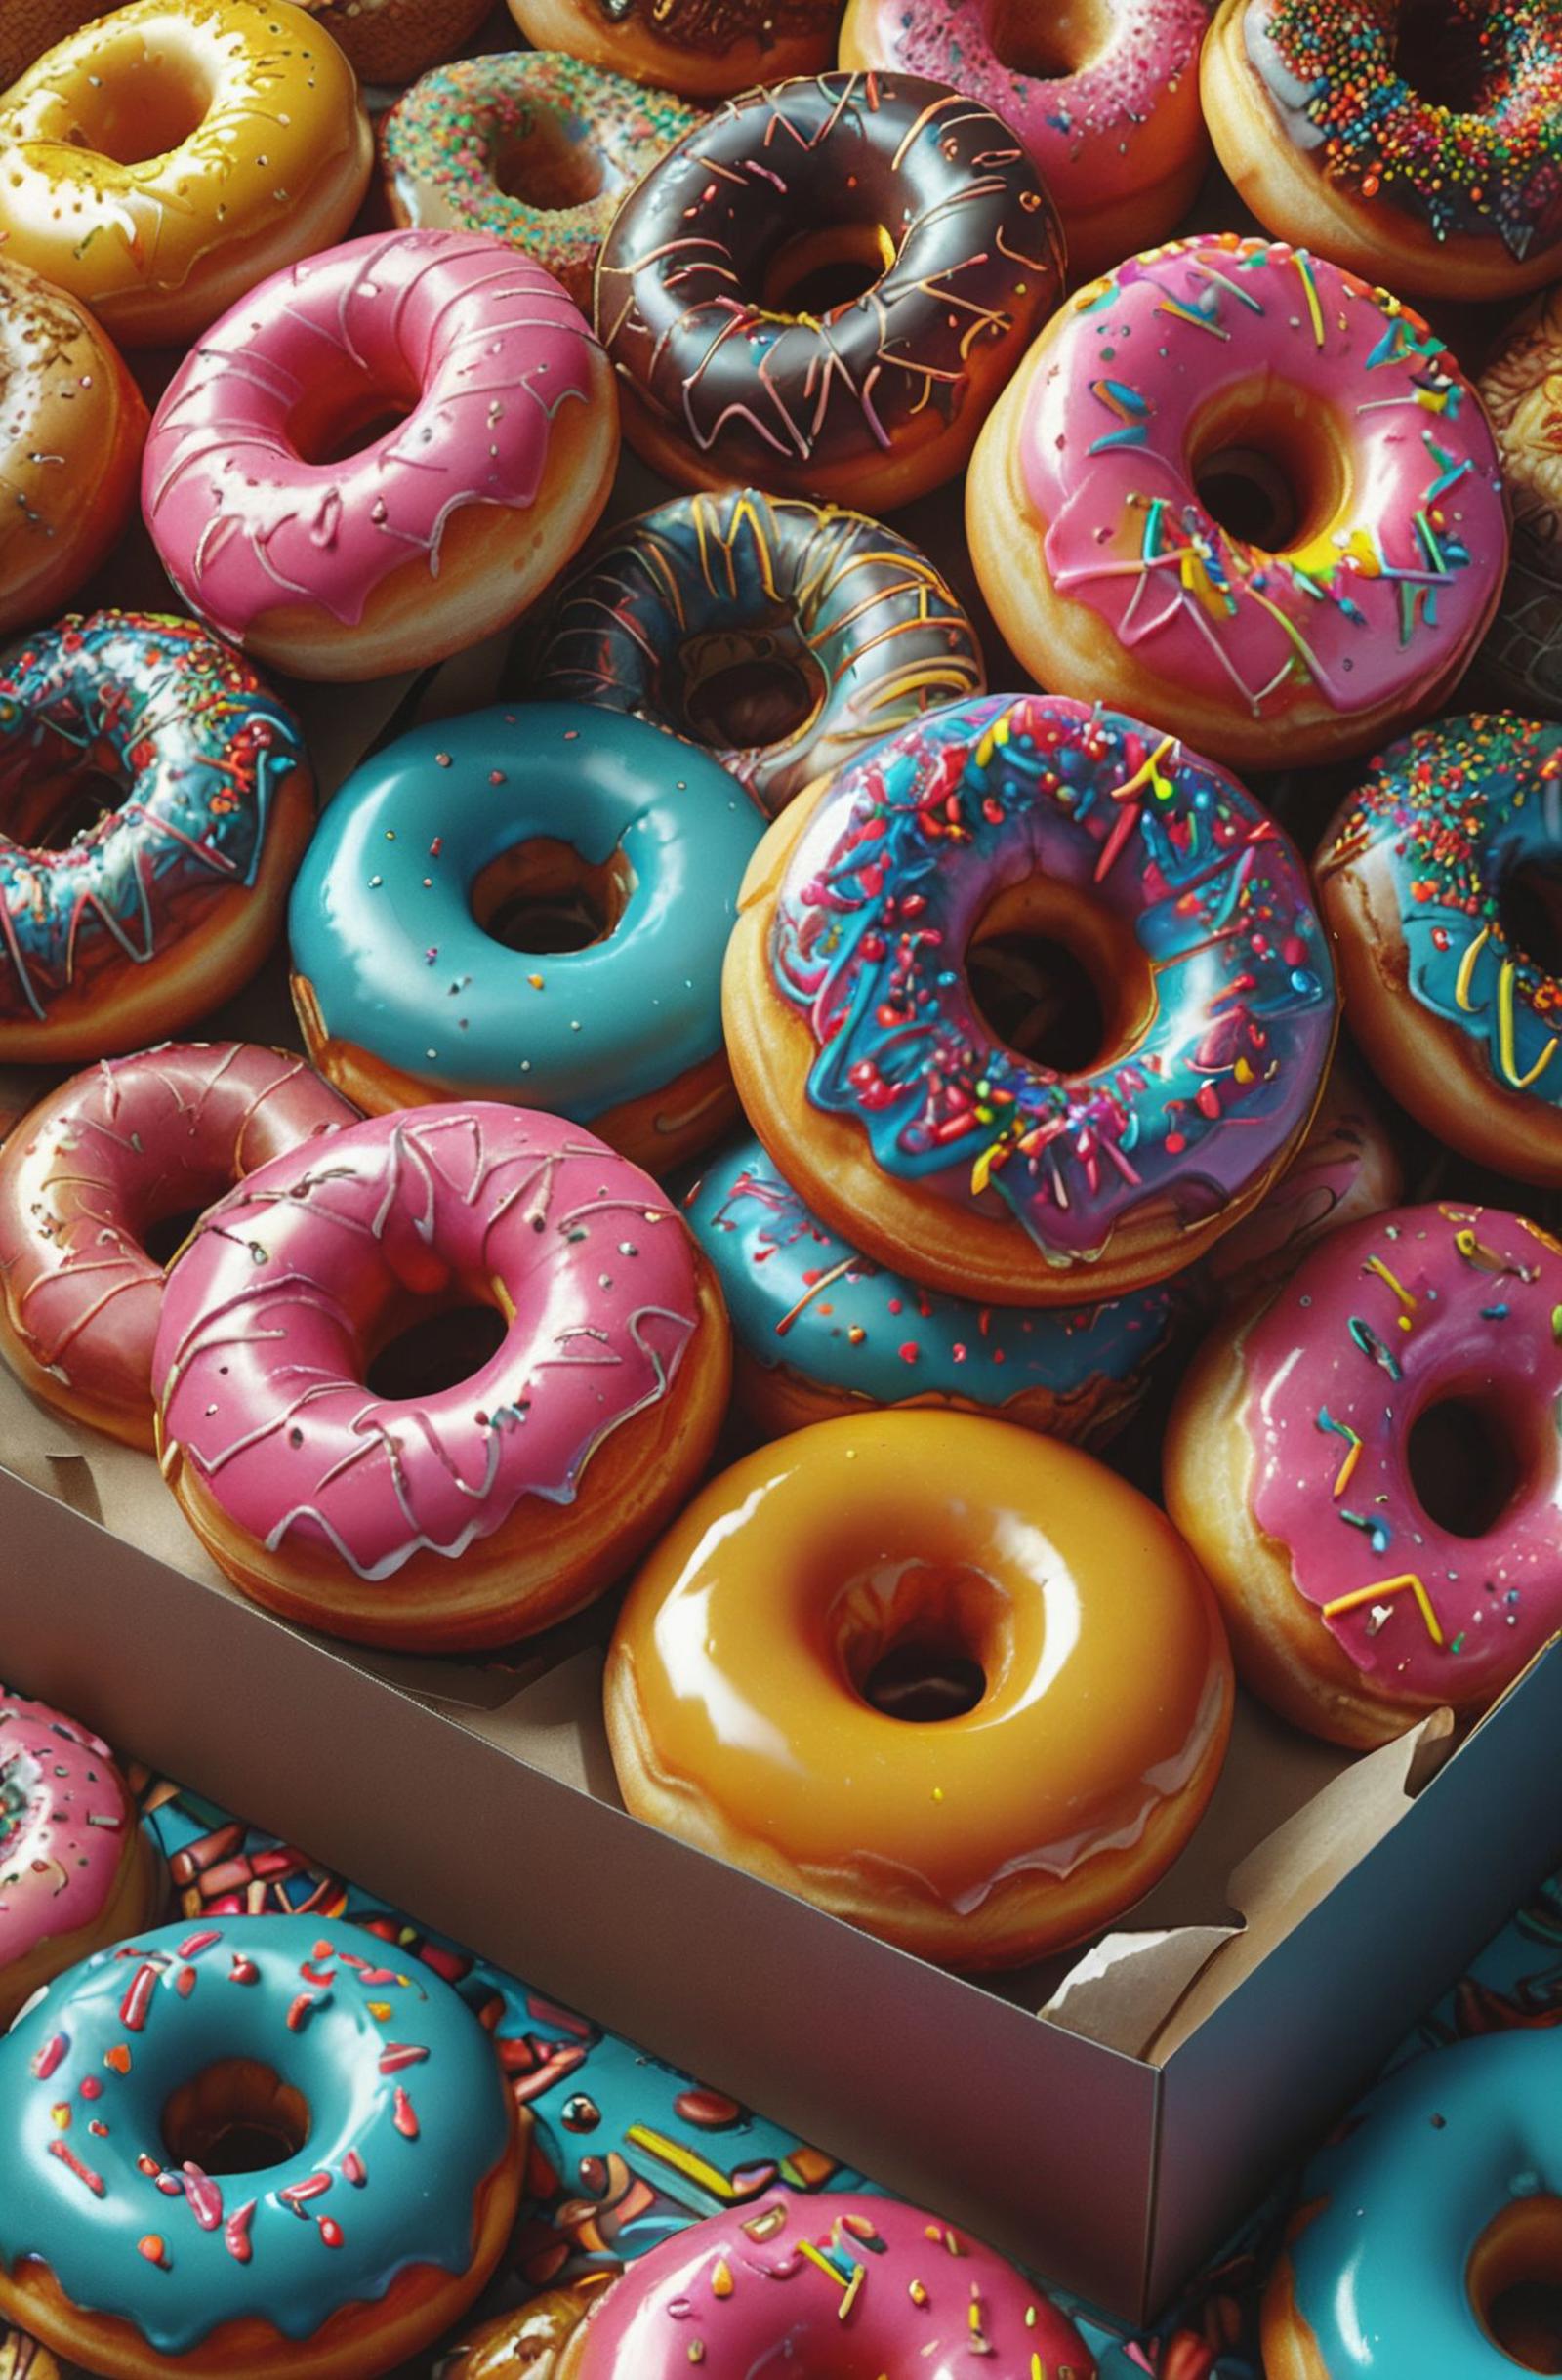 A Box of Assorted Flavored Donuts with Sprinkles and Frosting